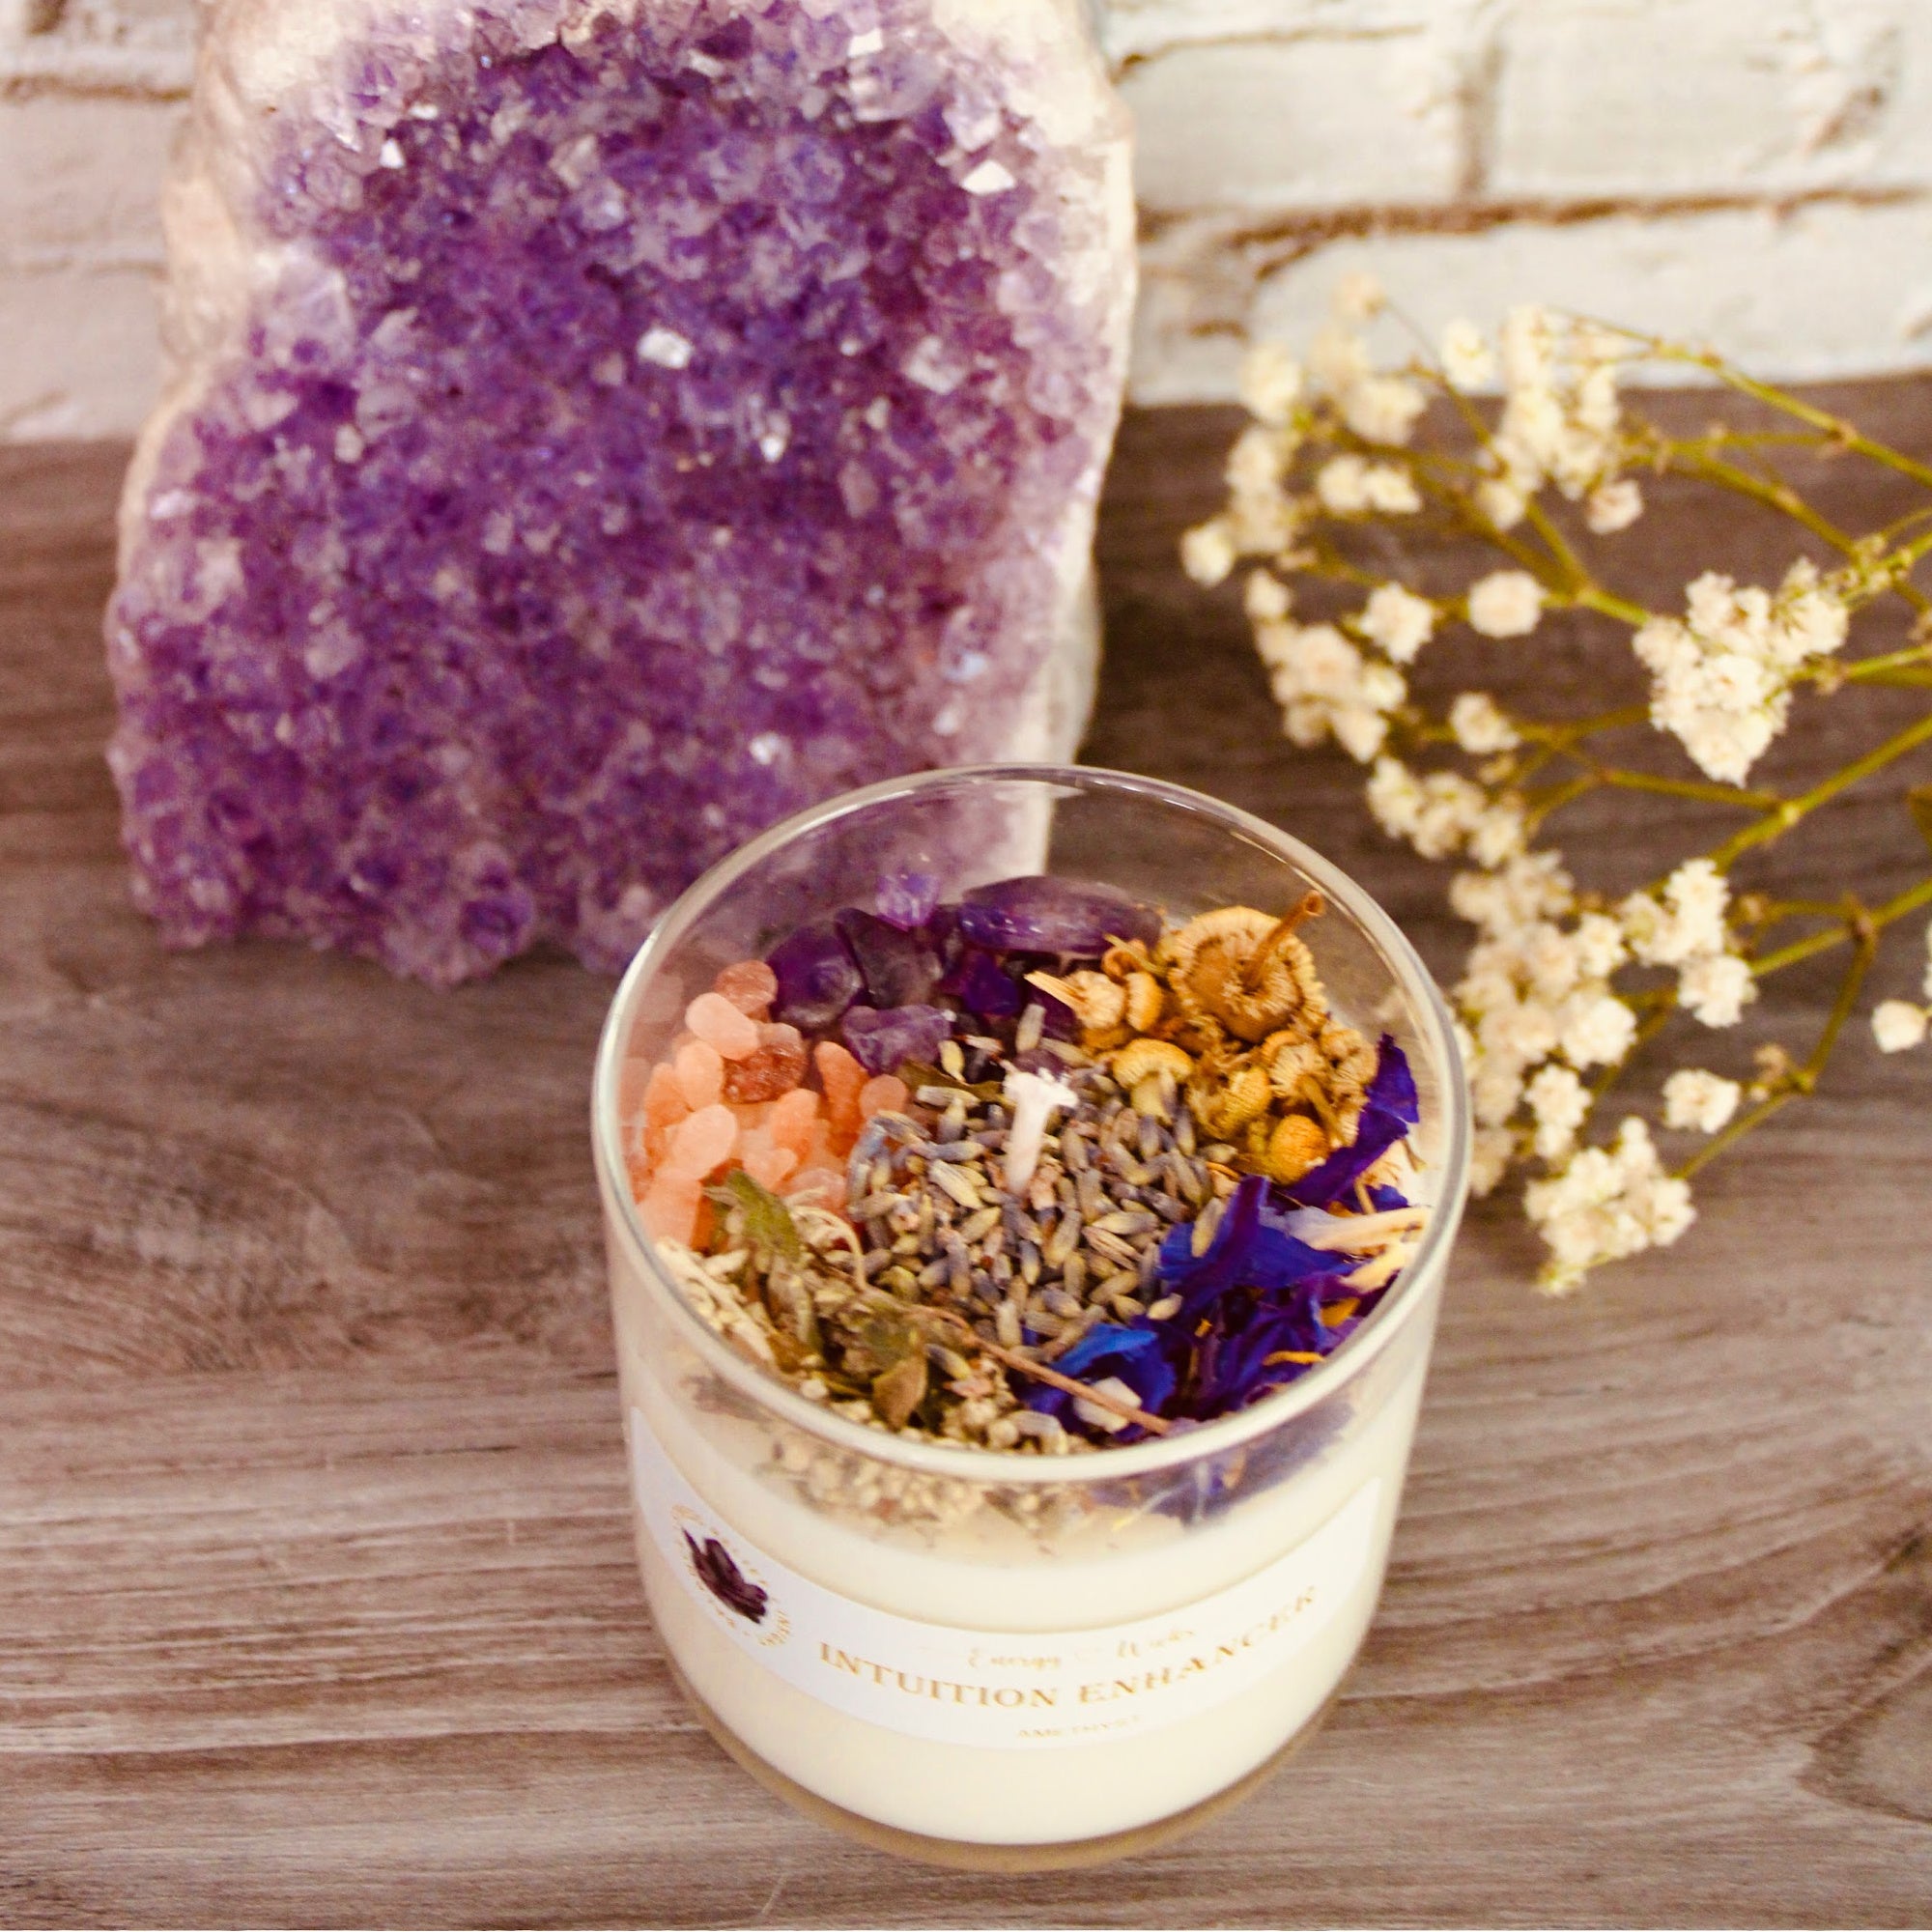 Intuition Enhancer Crystal Candle